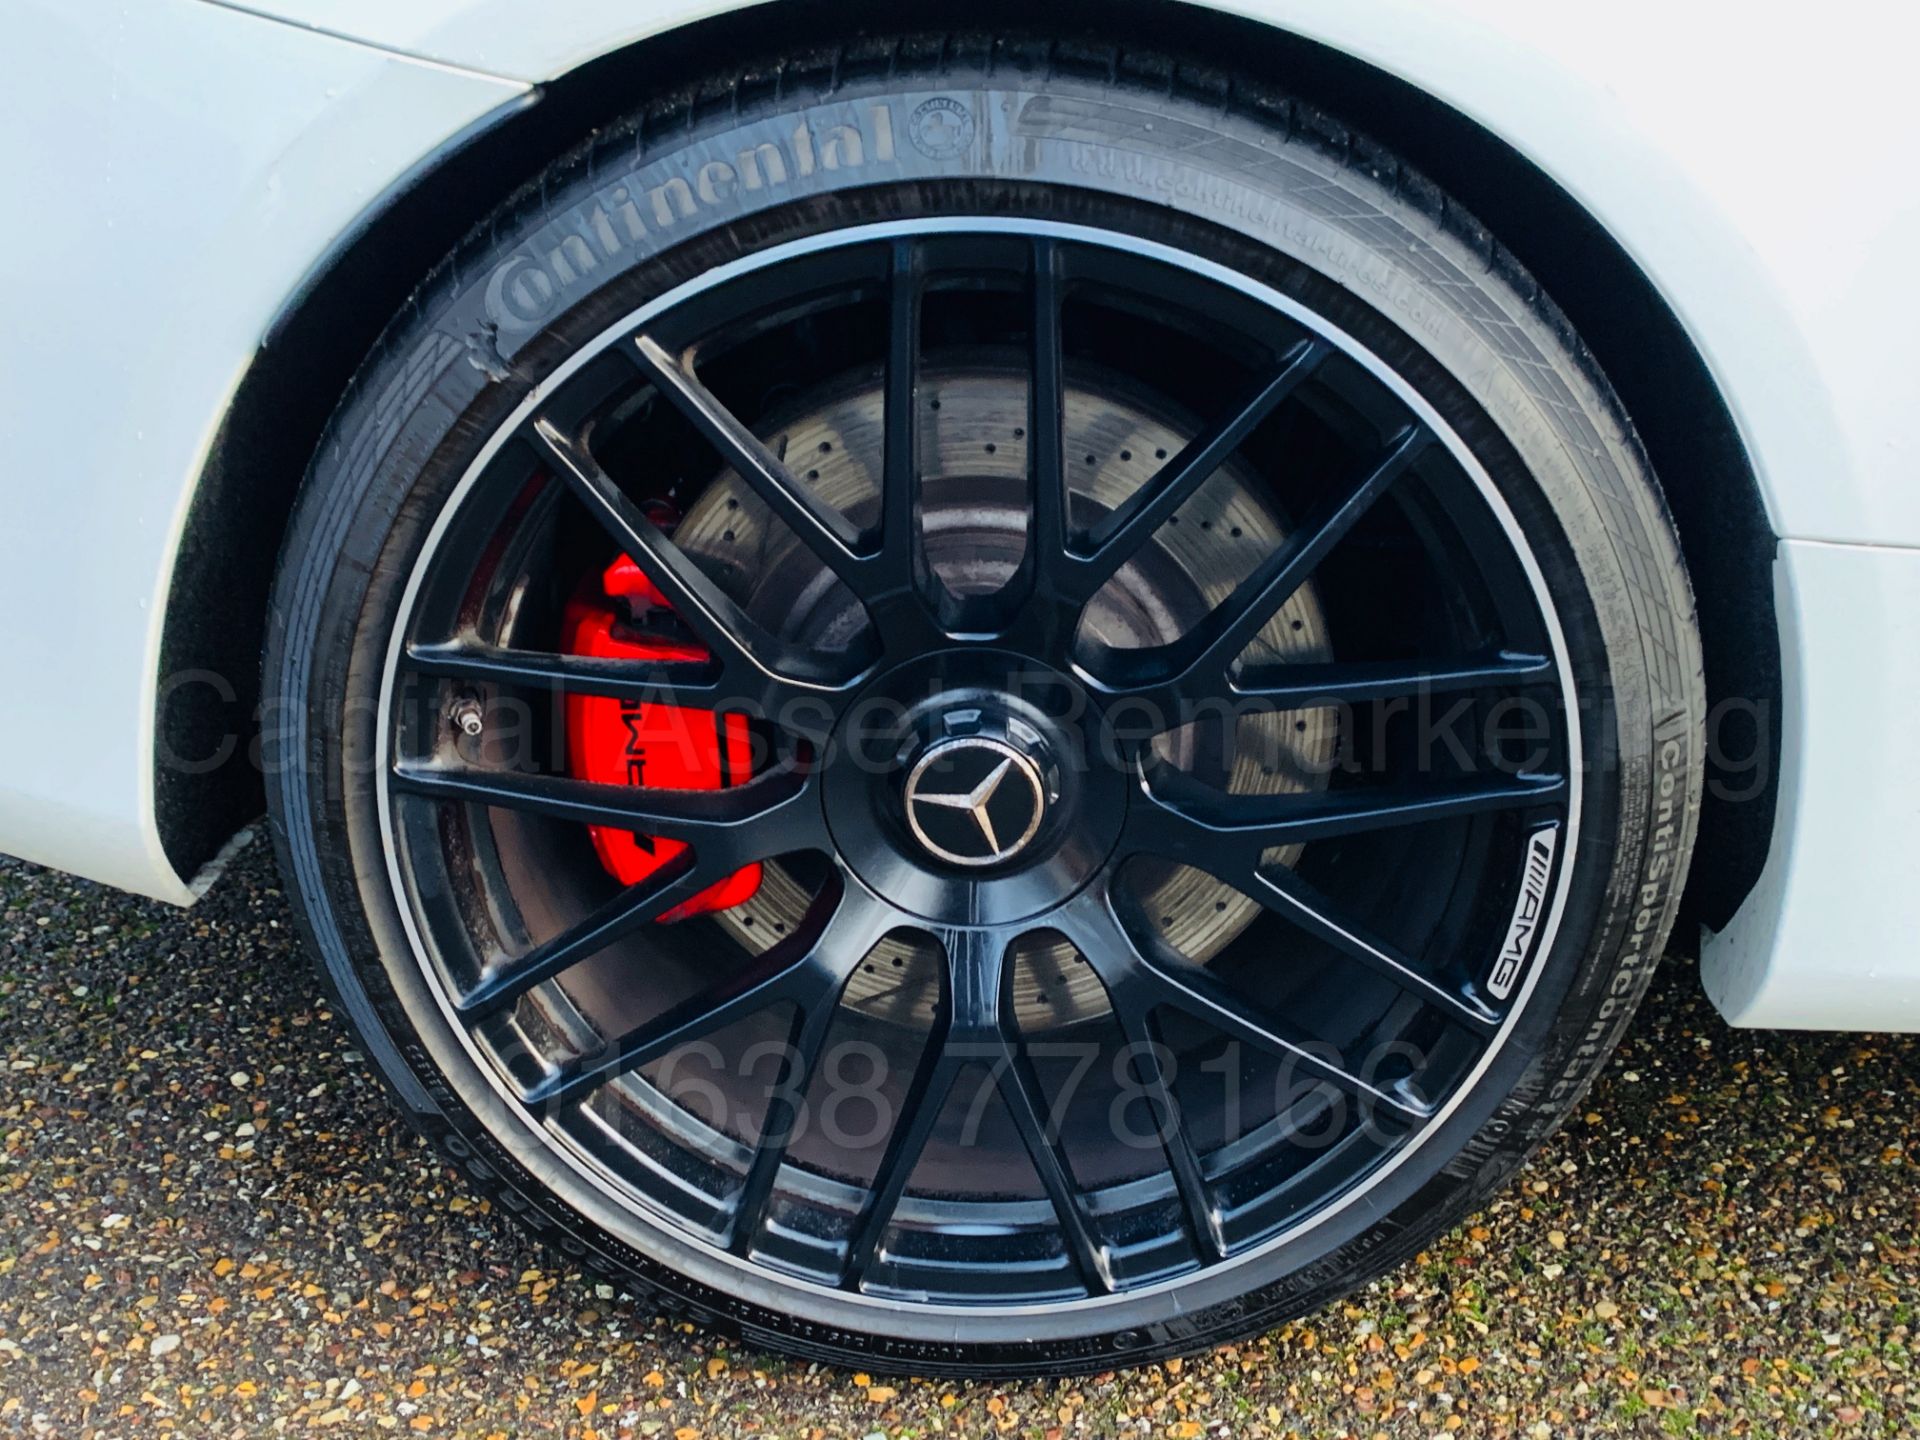 (On Sale) MERCEDES-BENZ AMG C63-S *CABRIOLET* (67 REG) '4.0 BI-TURBO -510 BHP - AUTO' *FULLY LOADED* - Image 36 of 79